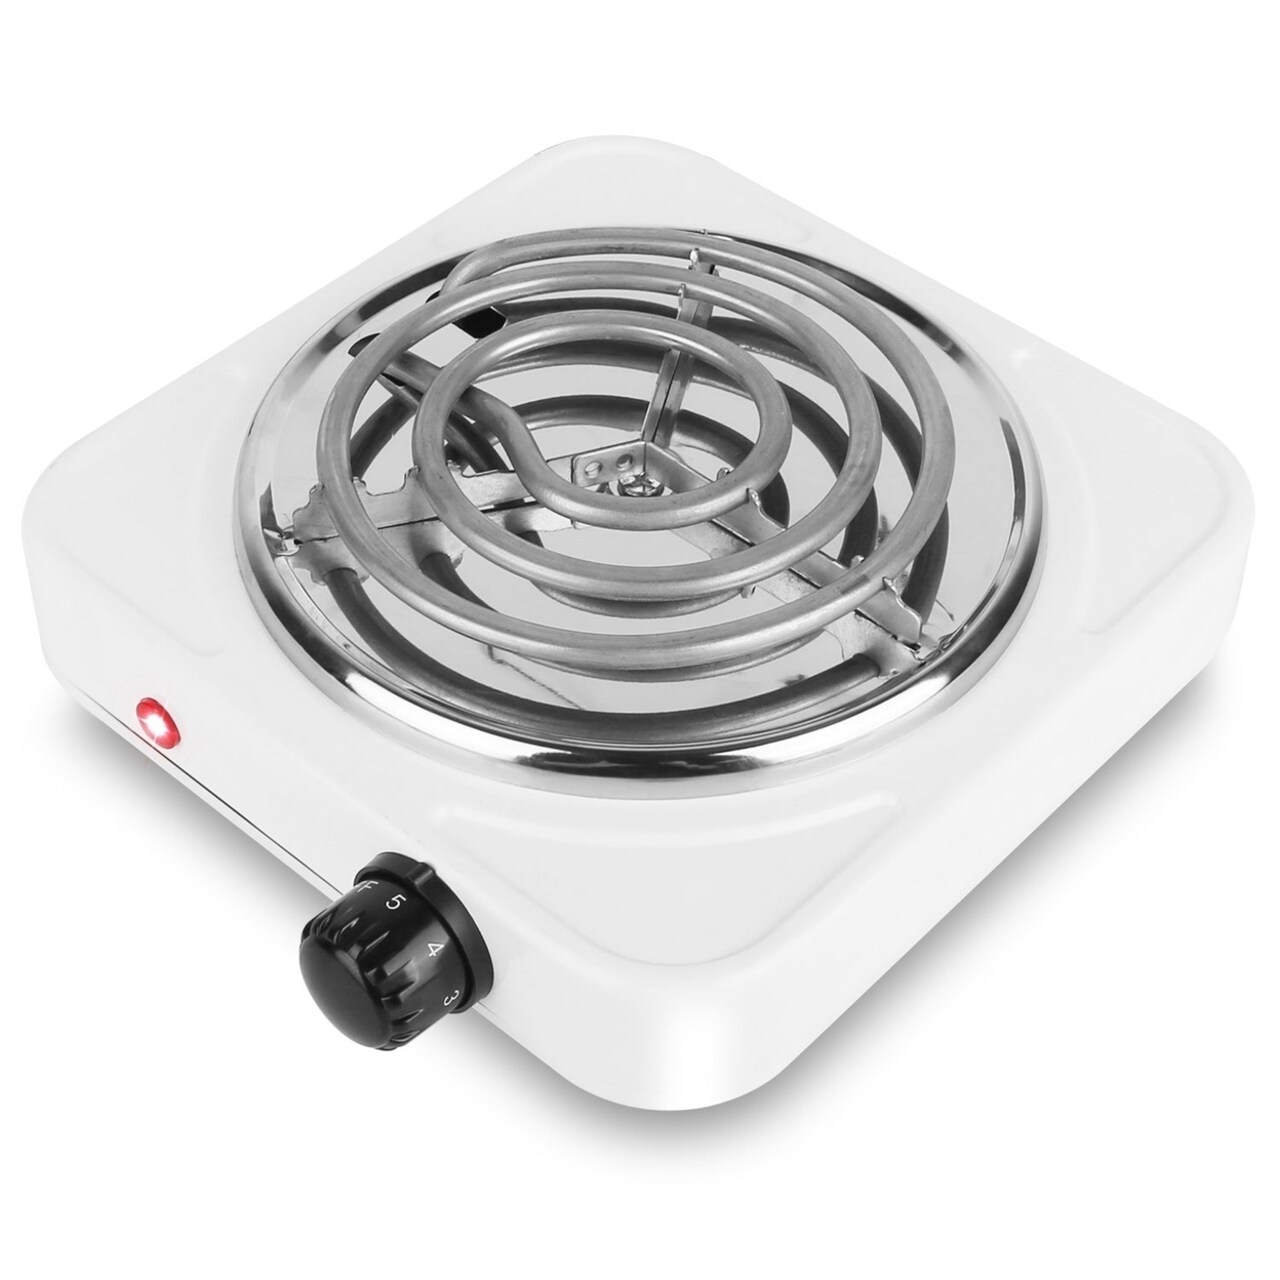 SKUSHOPS 1000W Electric Single Burner Coil Heating Hot Plate Stove